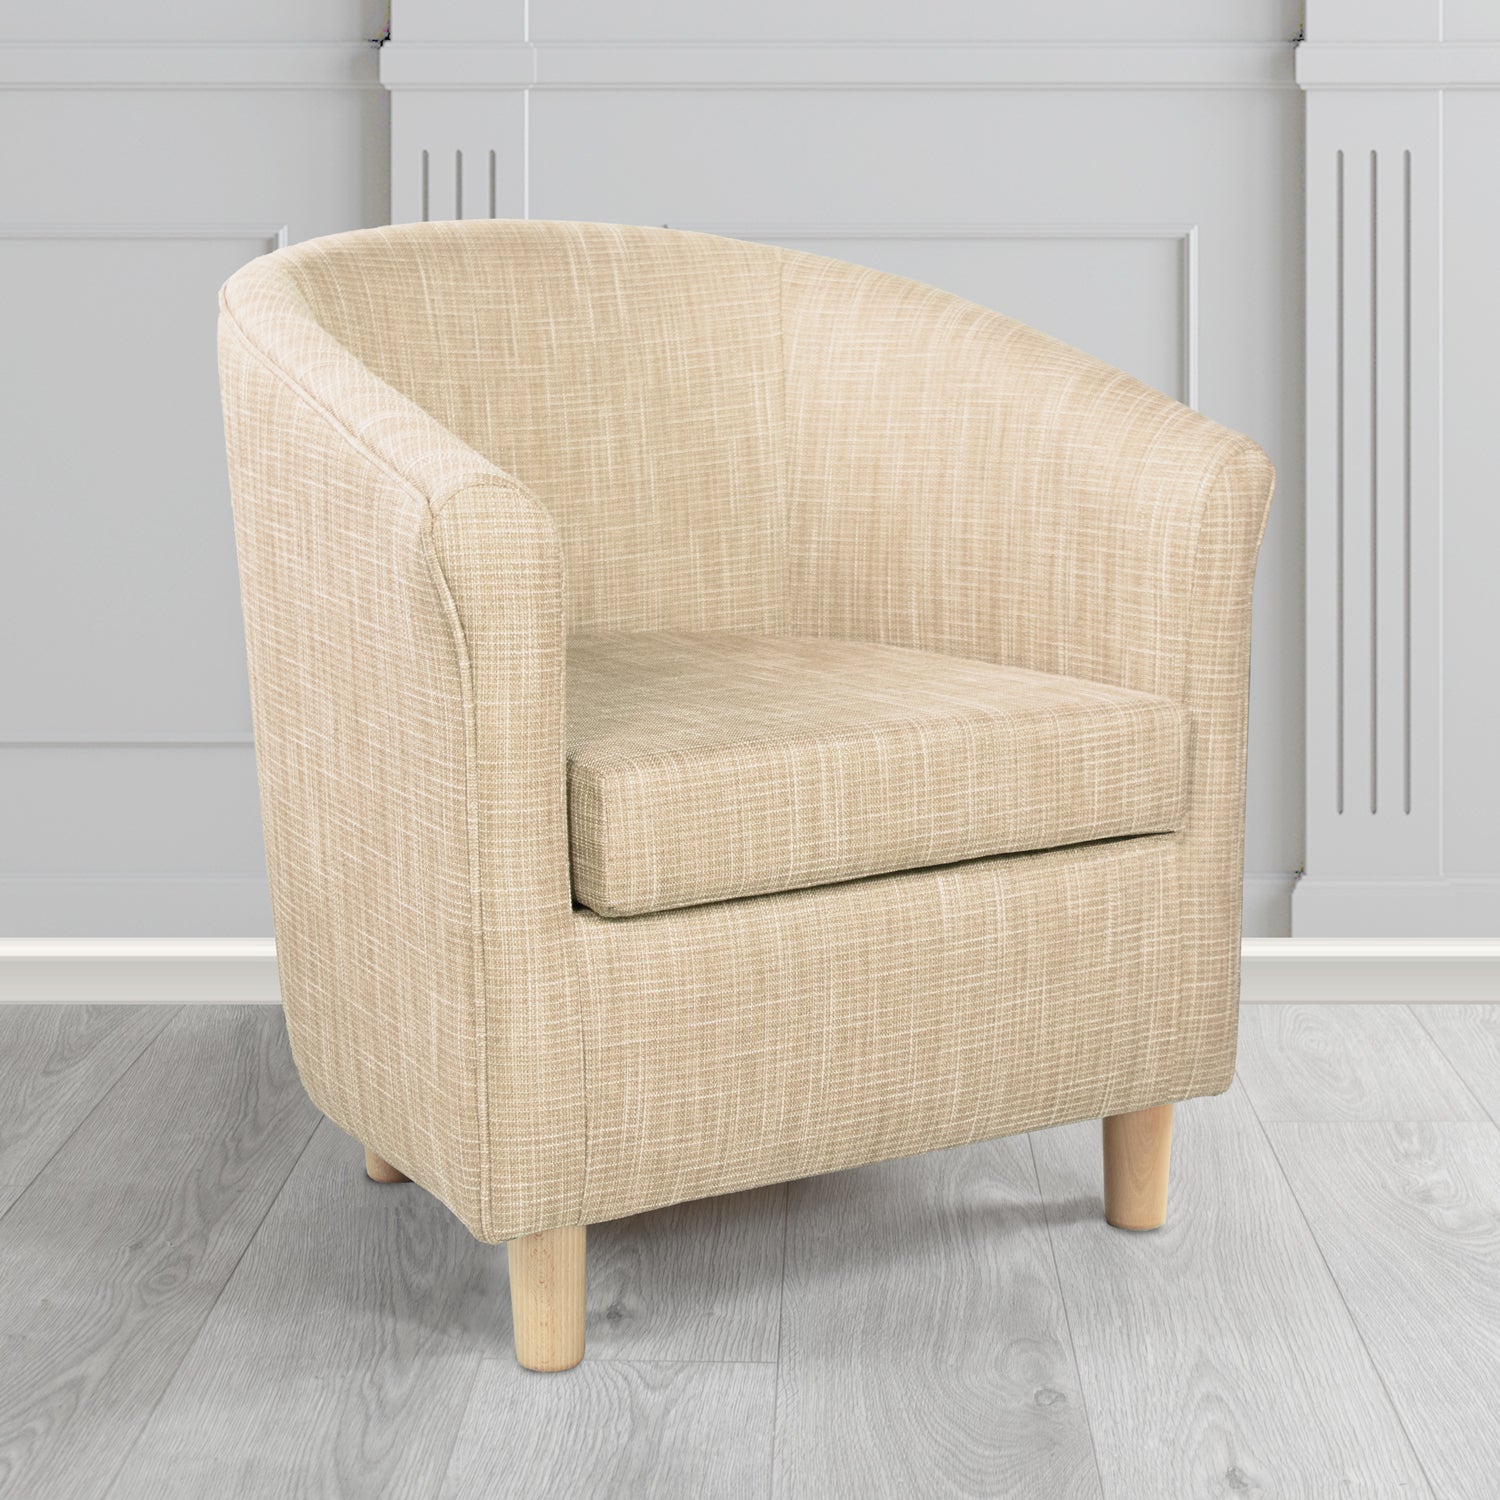 Tuscany Ravel Hessian Contract Crib 5 Fabric Tub Chair - Antimicrobial & Water-Resistant - The Tub Chair Shop